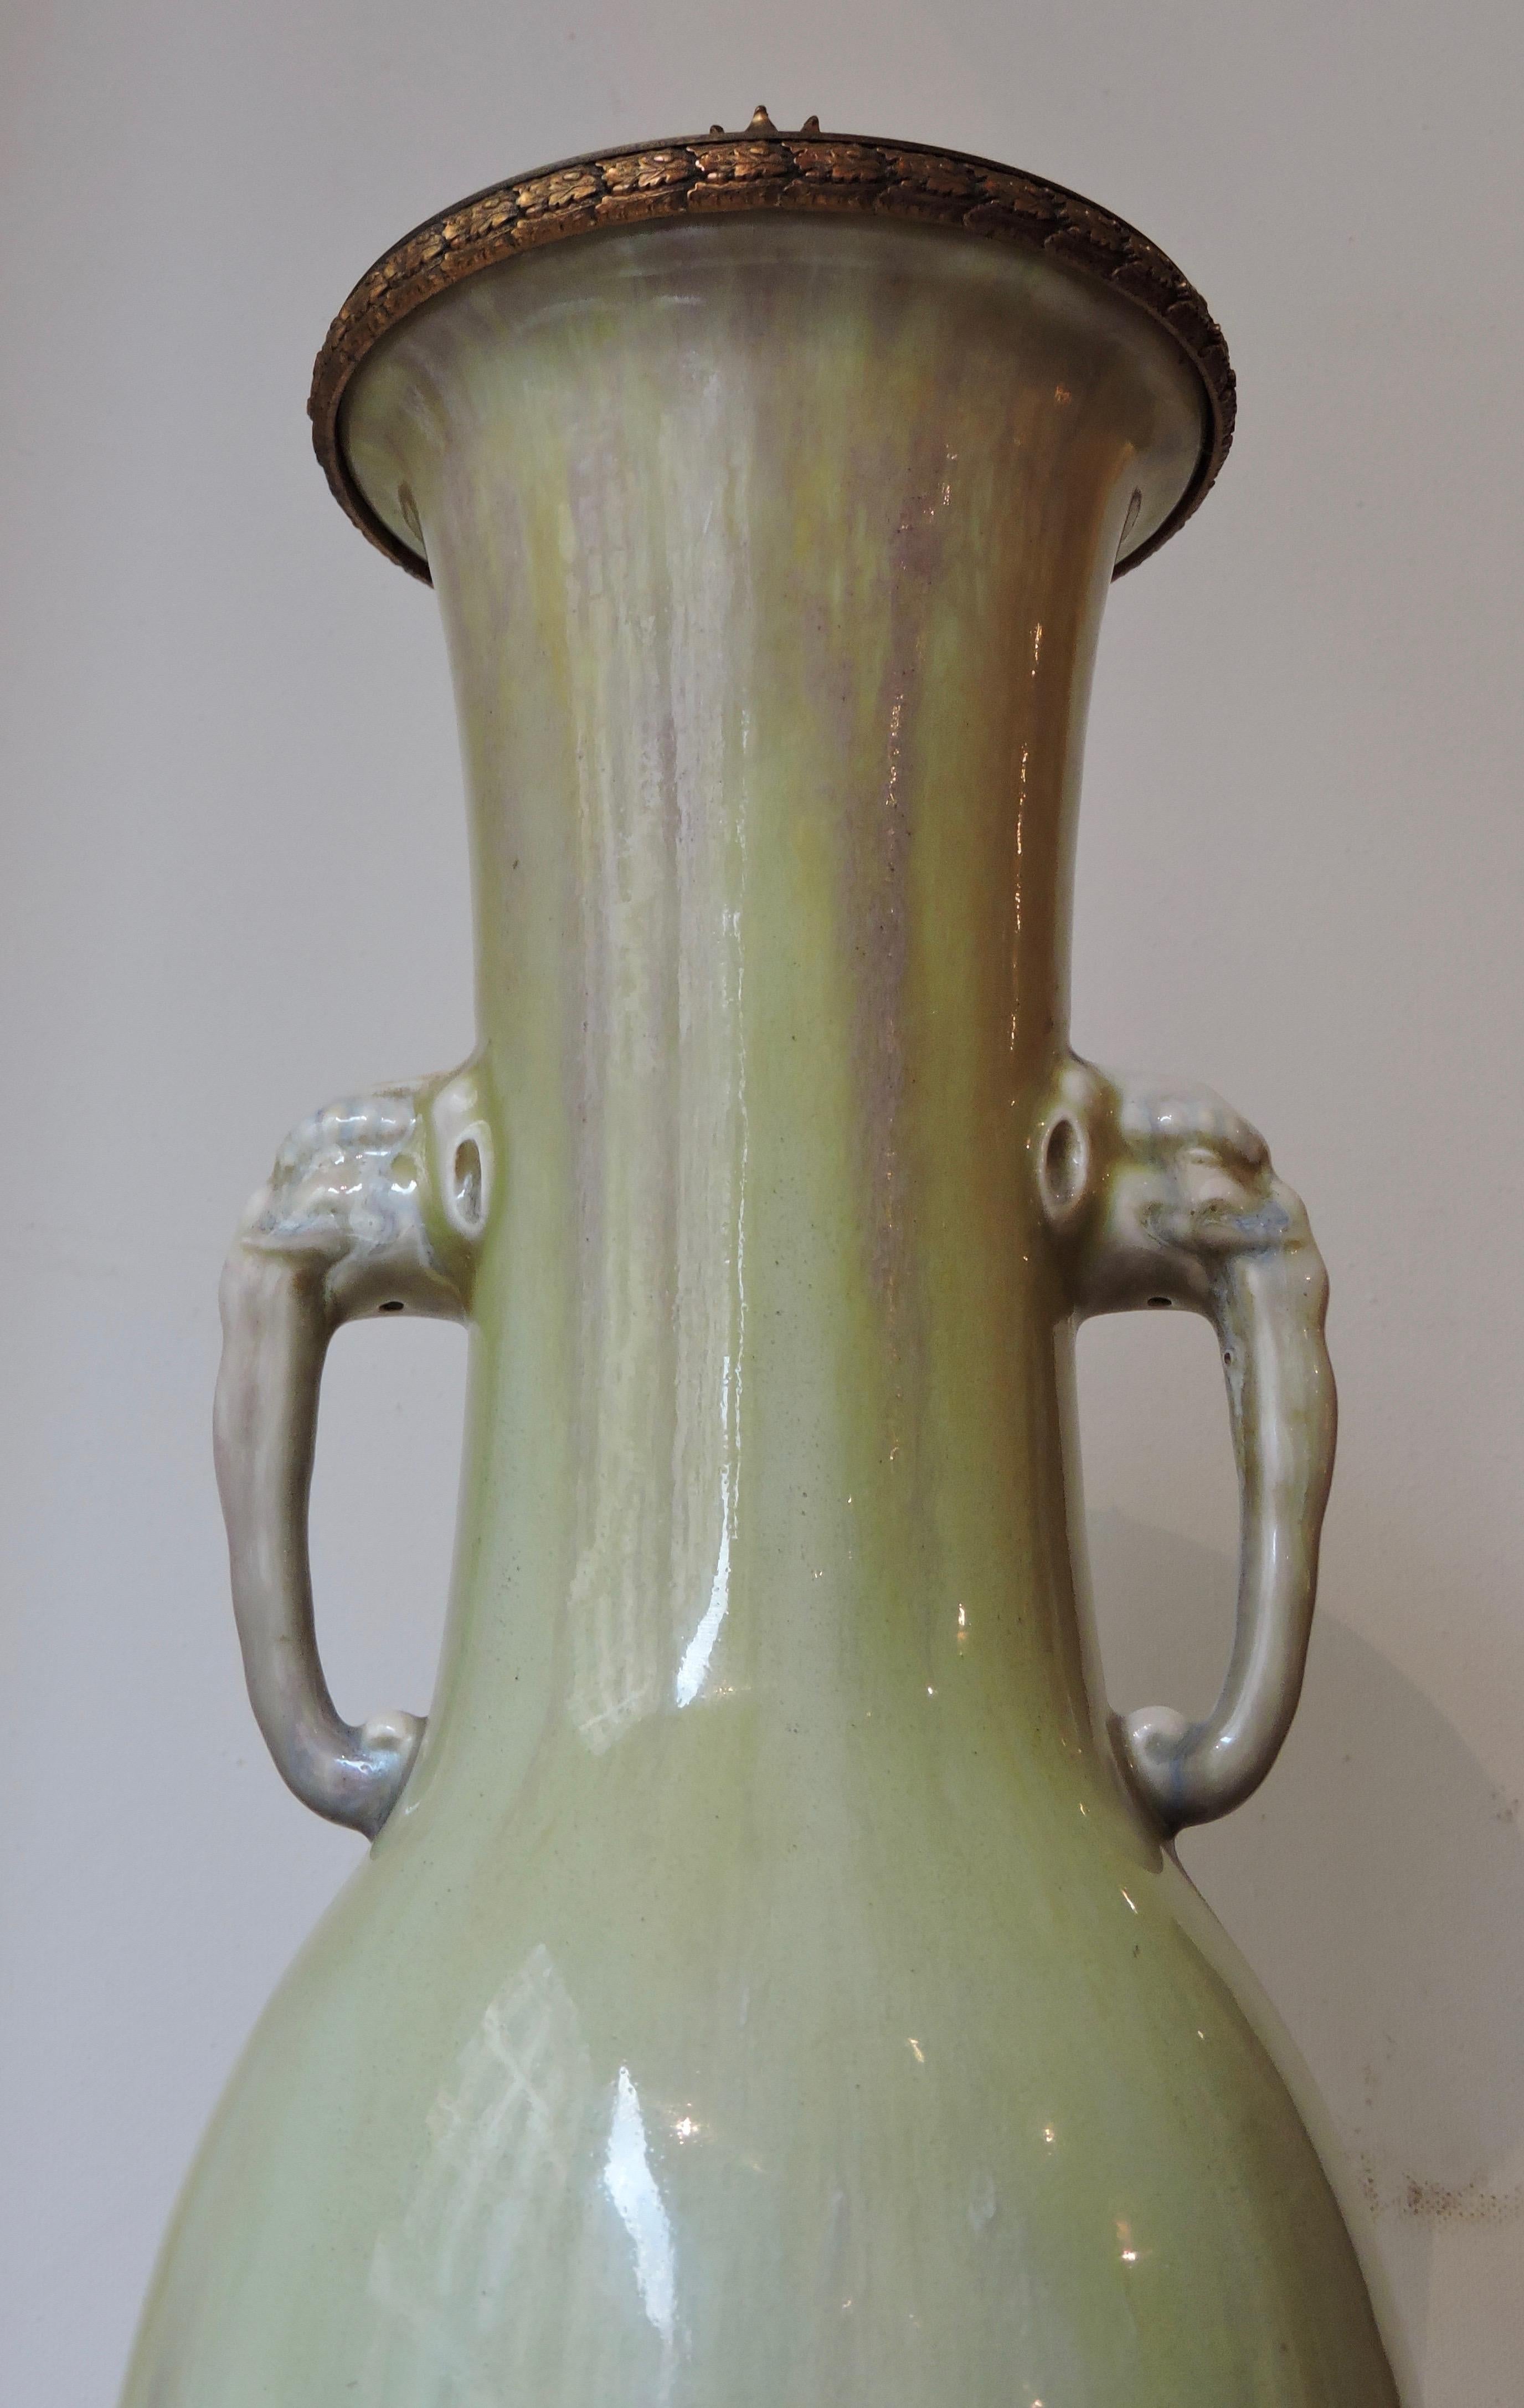 A Theodore Deck (1823-1891) Celadon Enamelled Faience Vase Ormolu-Mounted in Lamp
circa 1870.
The neck adorned with two symmetrical elephant heads handles.
Th.Deck impressed uppercase mark
Fitted for electricity.
 